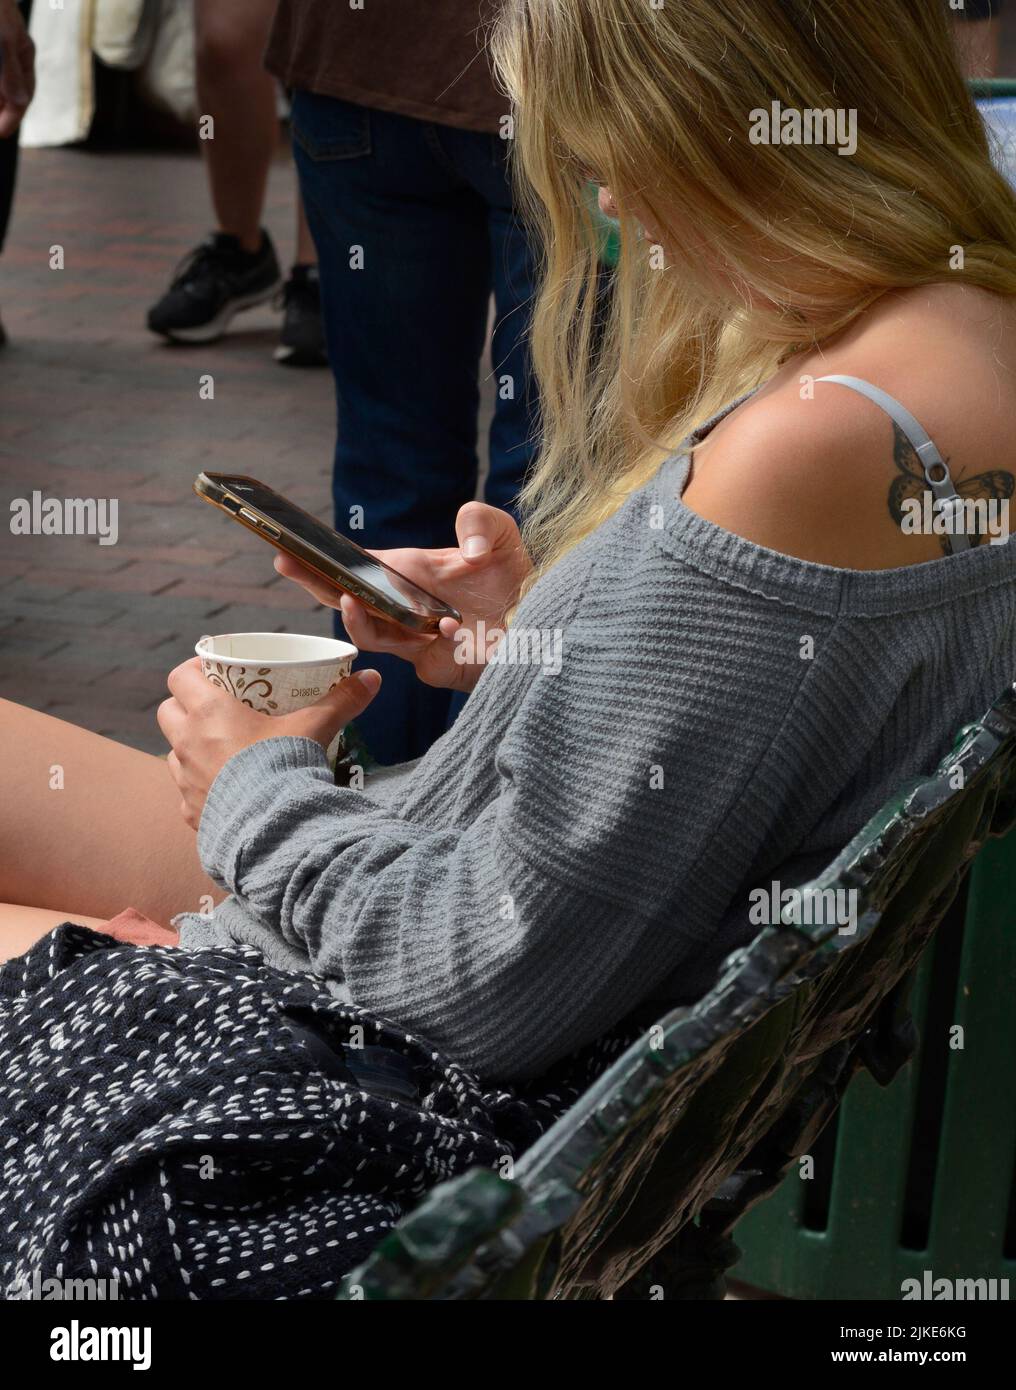 A young woman uses her smartphone while sitting on a bench in Santa Fe, New Mexico. Stock Photo